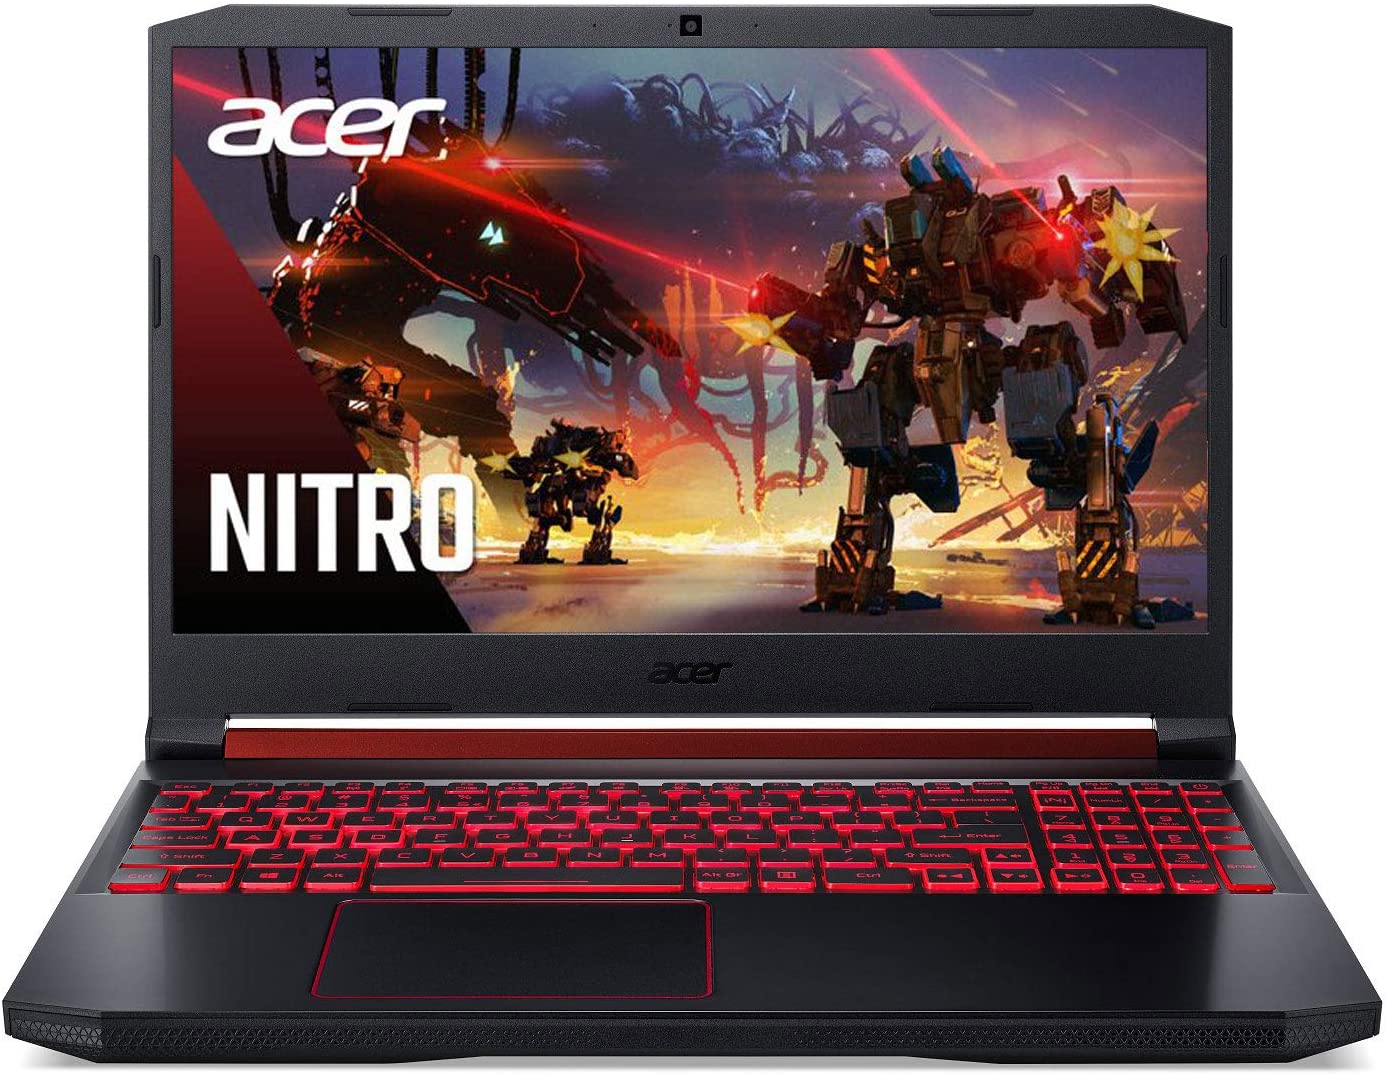 The front view of the Acer Nitro 5 gaming laptop.